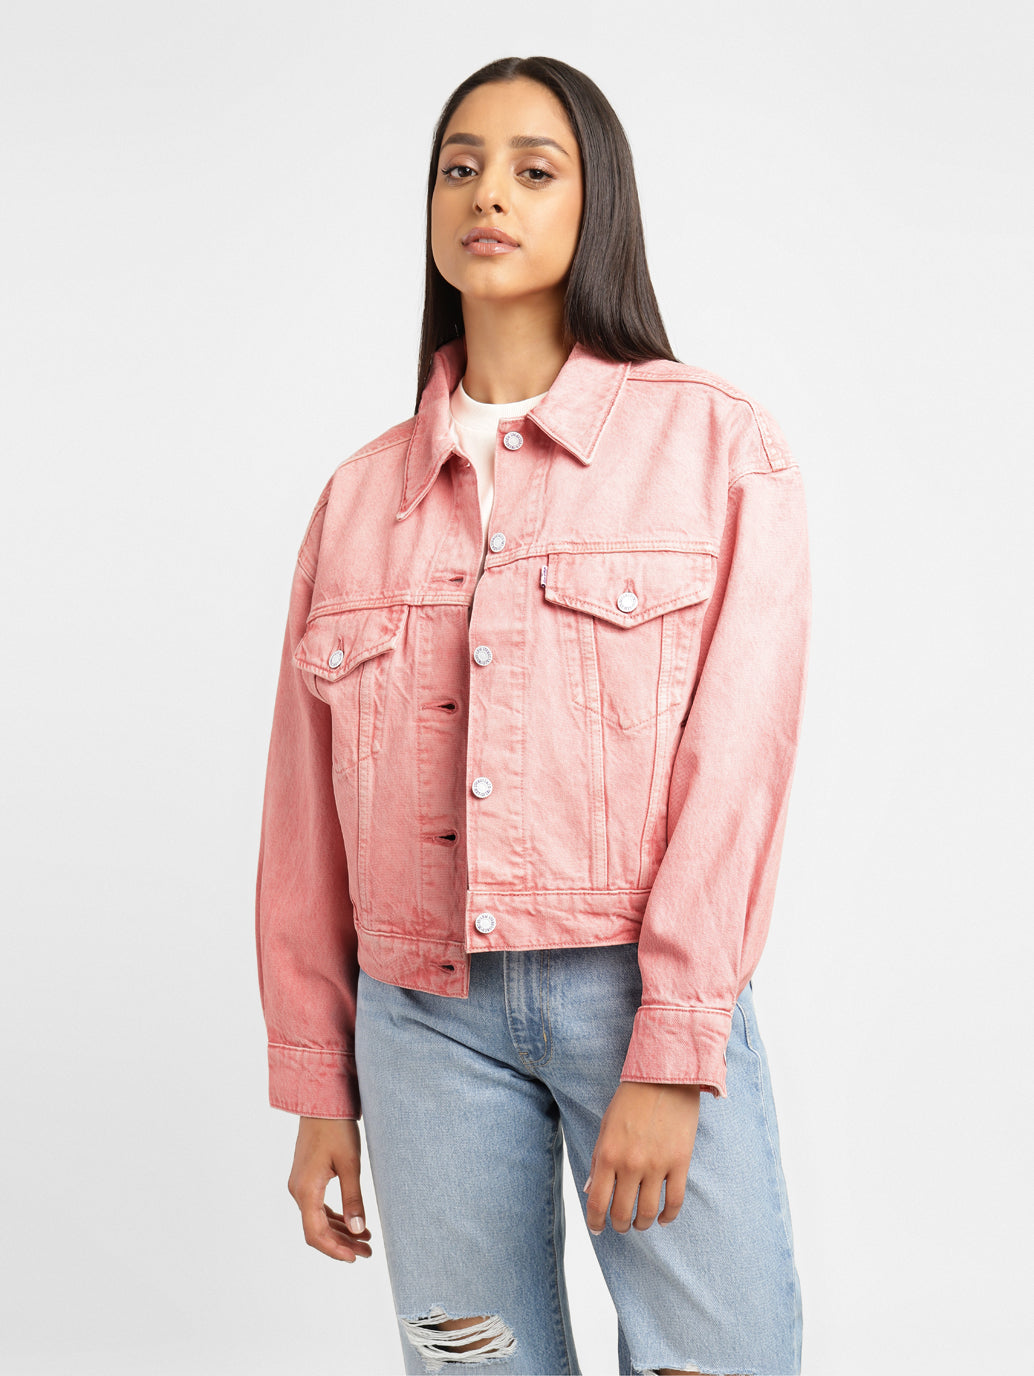 Buy from our Deepika Padukone Collection Online – Levis India Store